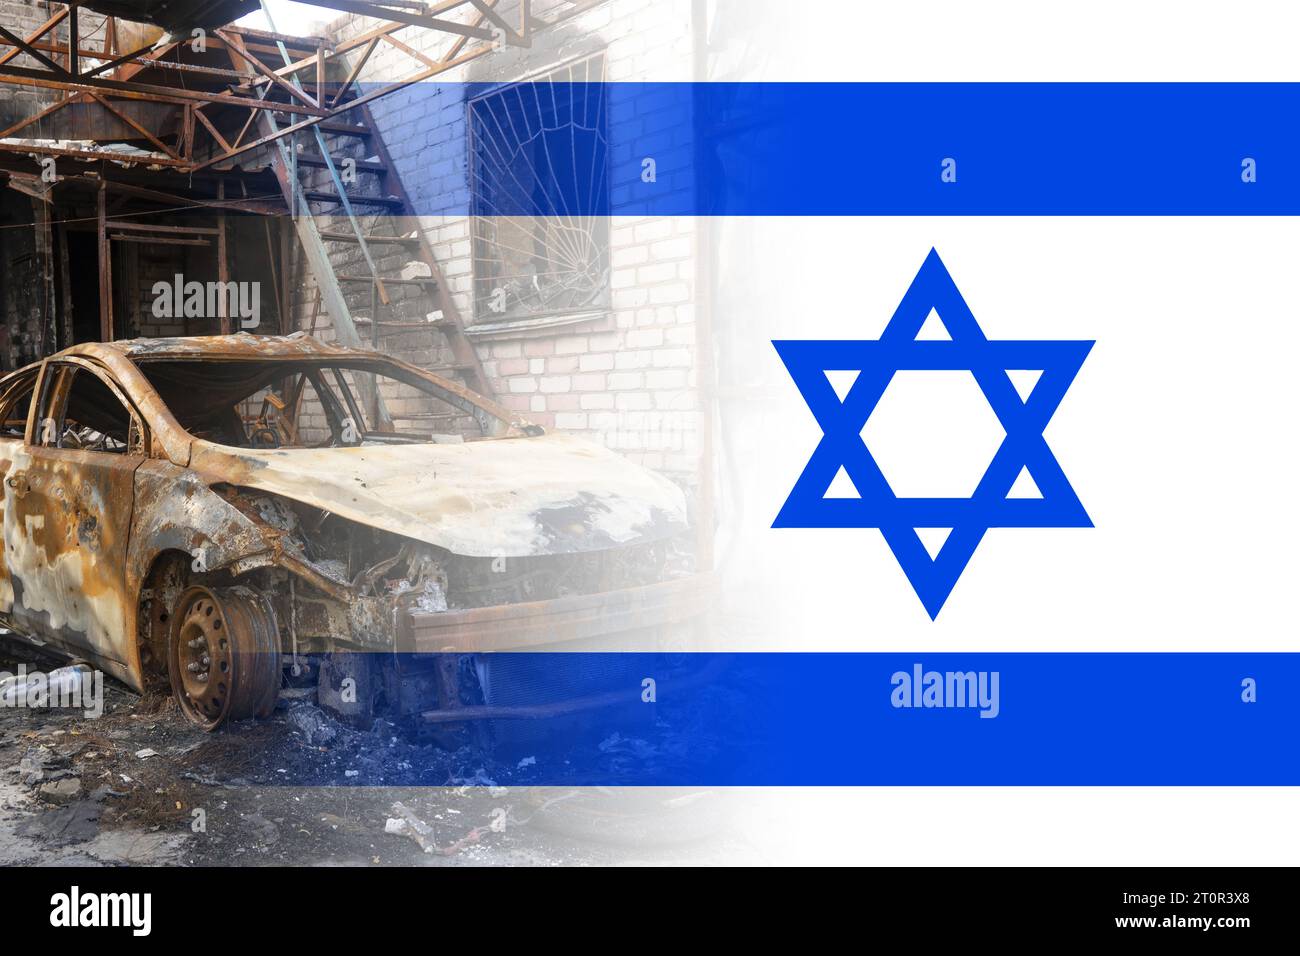 A destroyed civilian car against the background of the Israeli flag. Israeli-Palestinian conflict. Terror of civilians Stock Photo